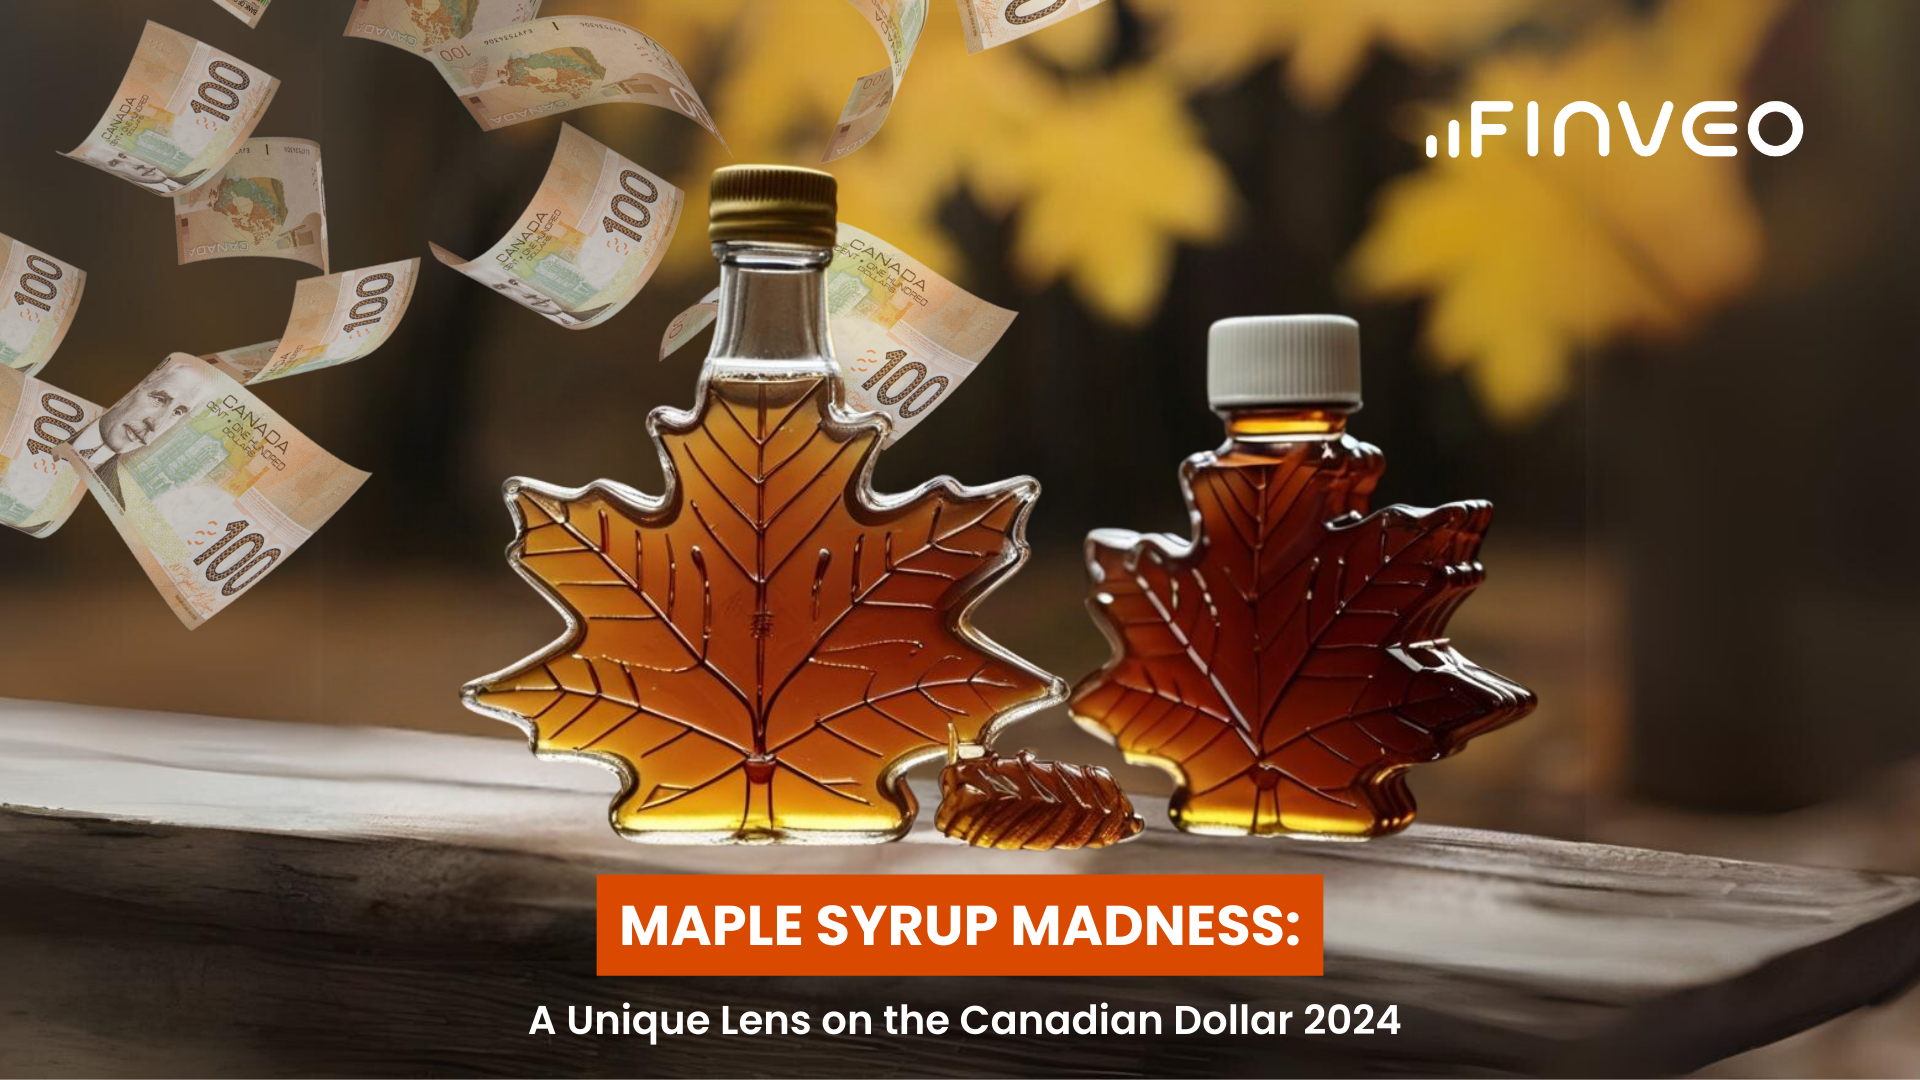 Maple Syrup Madness: A Unique Lens on the Canadian Dollar 2024